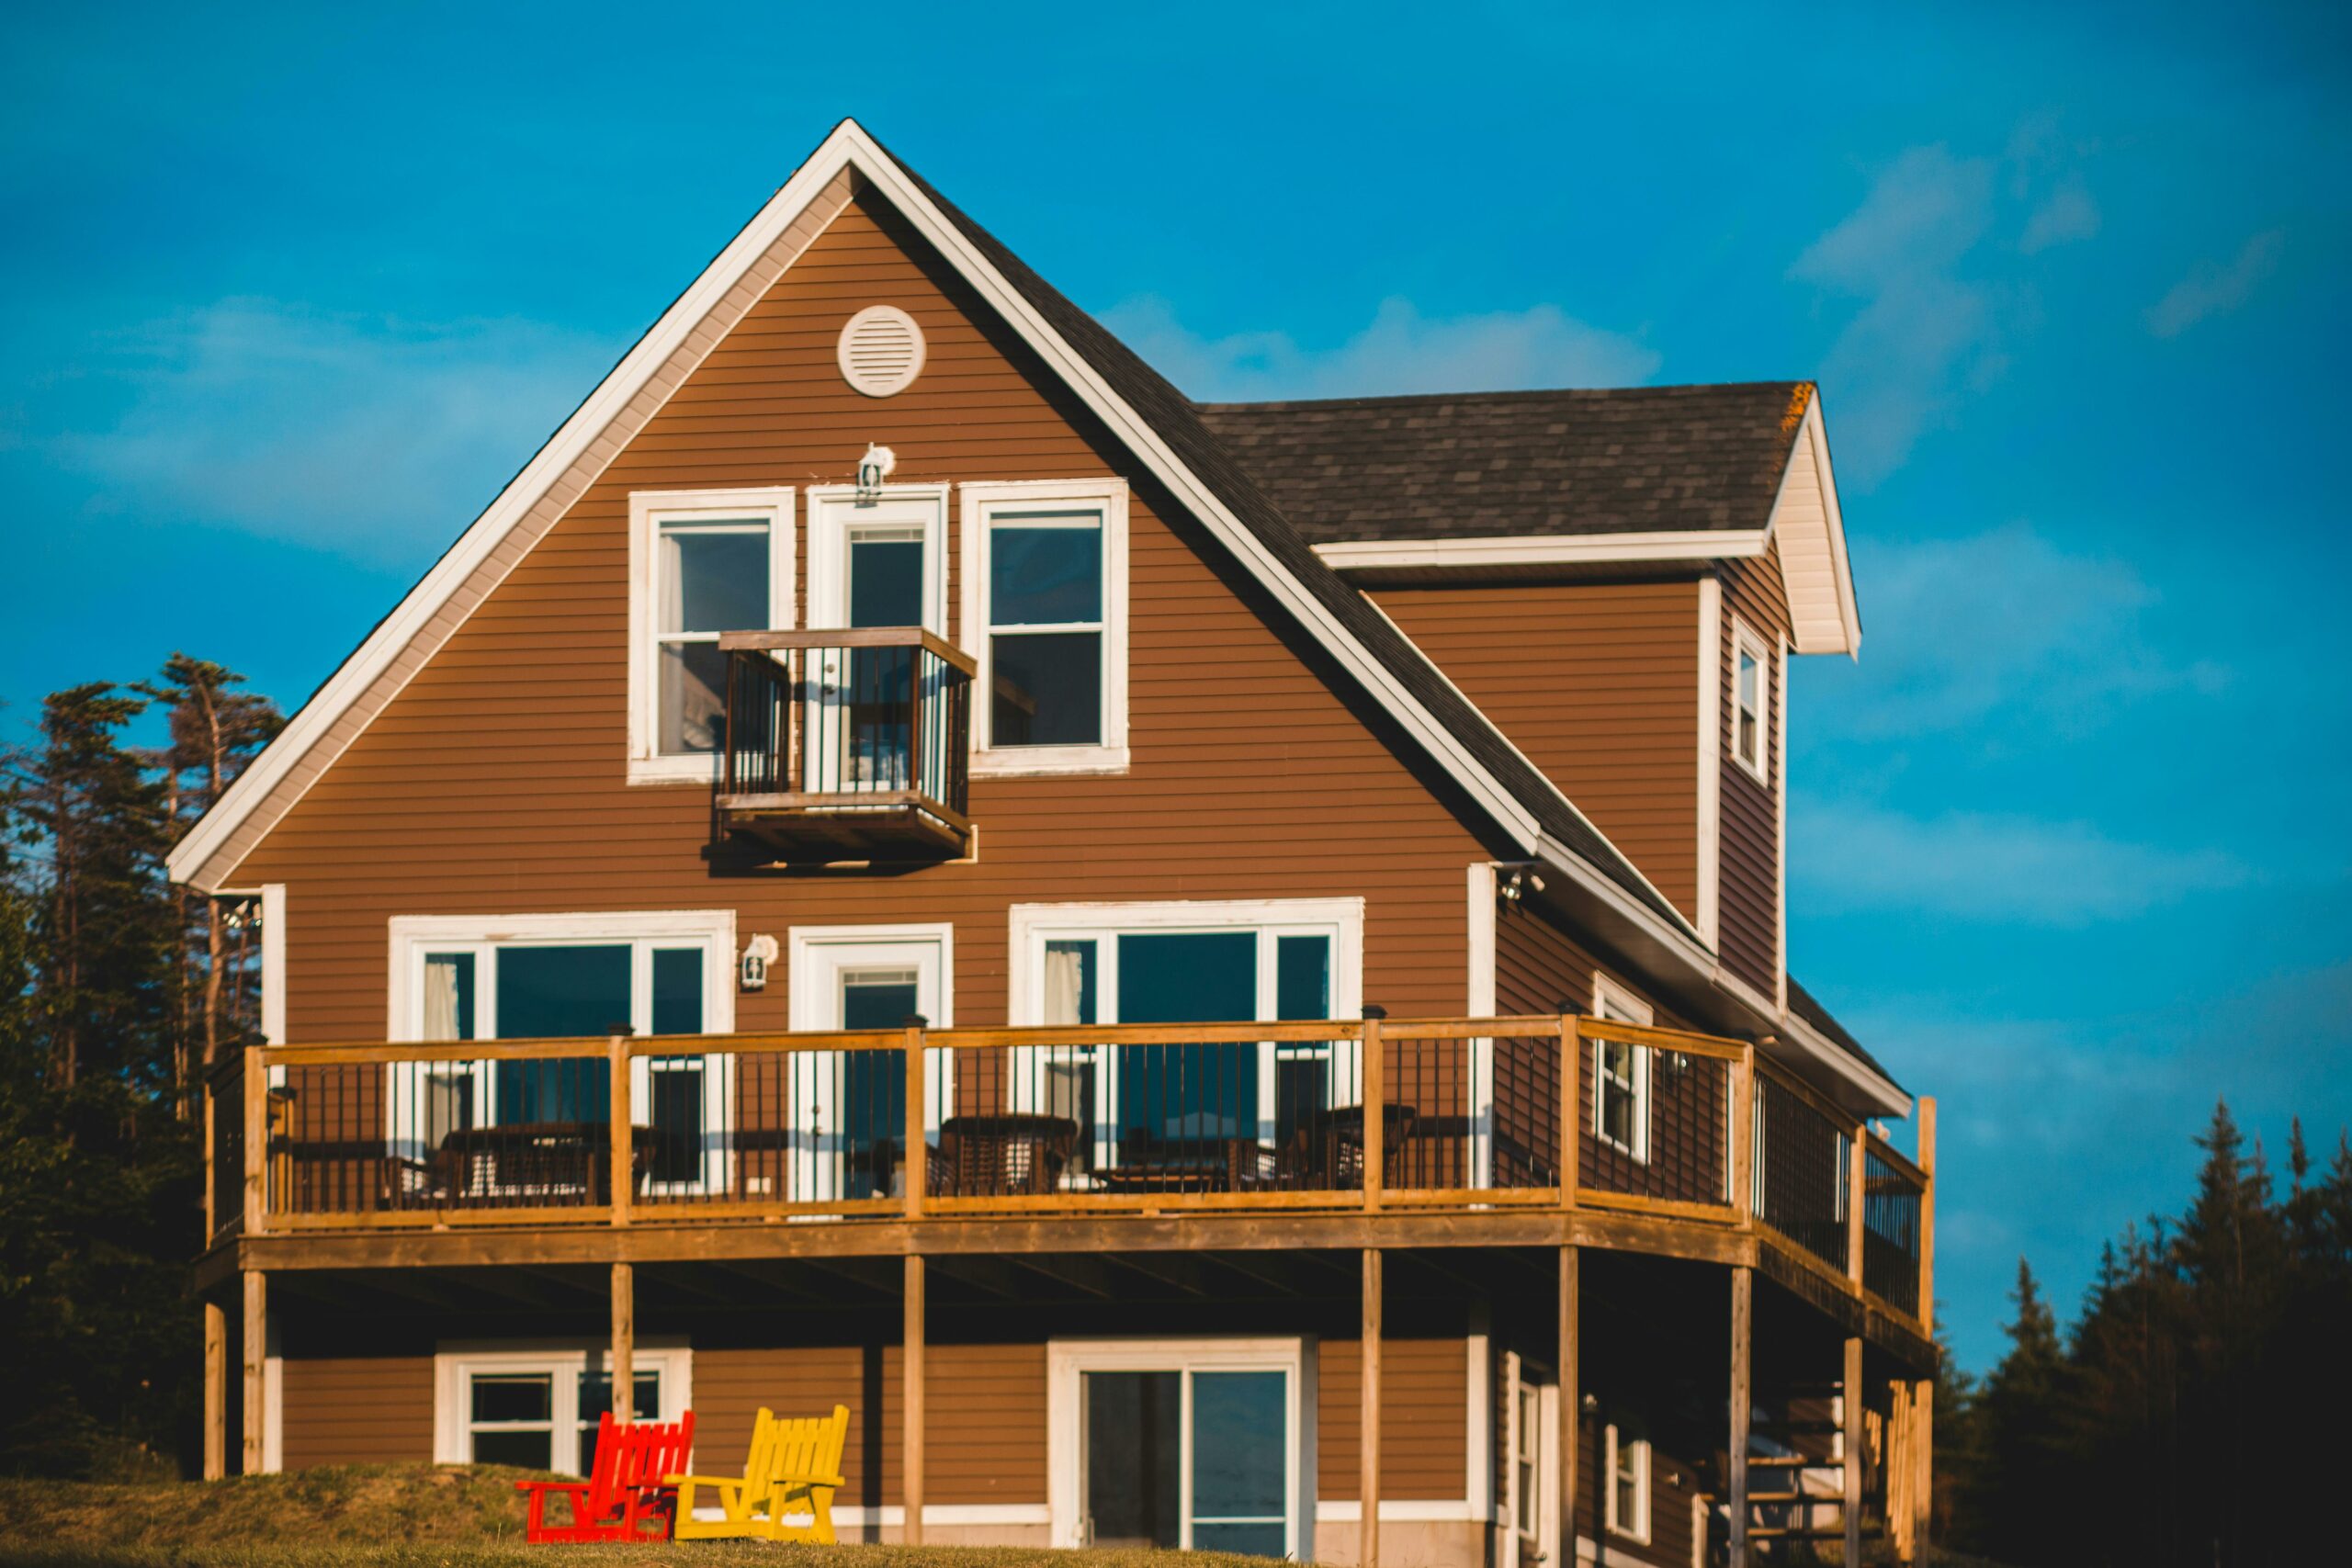 The Hidden Pitfalls of Co-Owning a Vacation Home